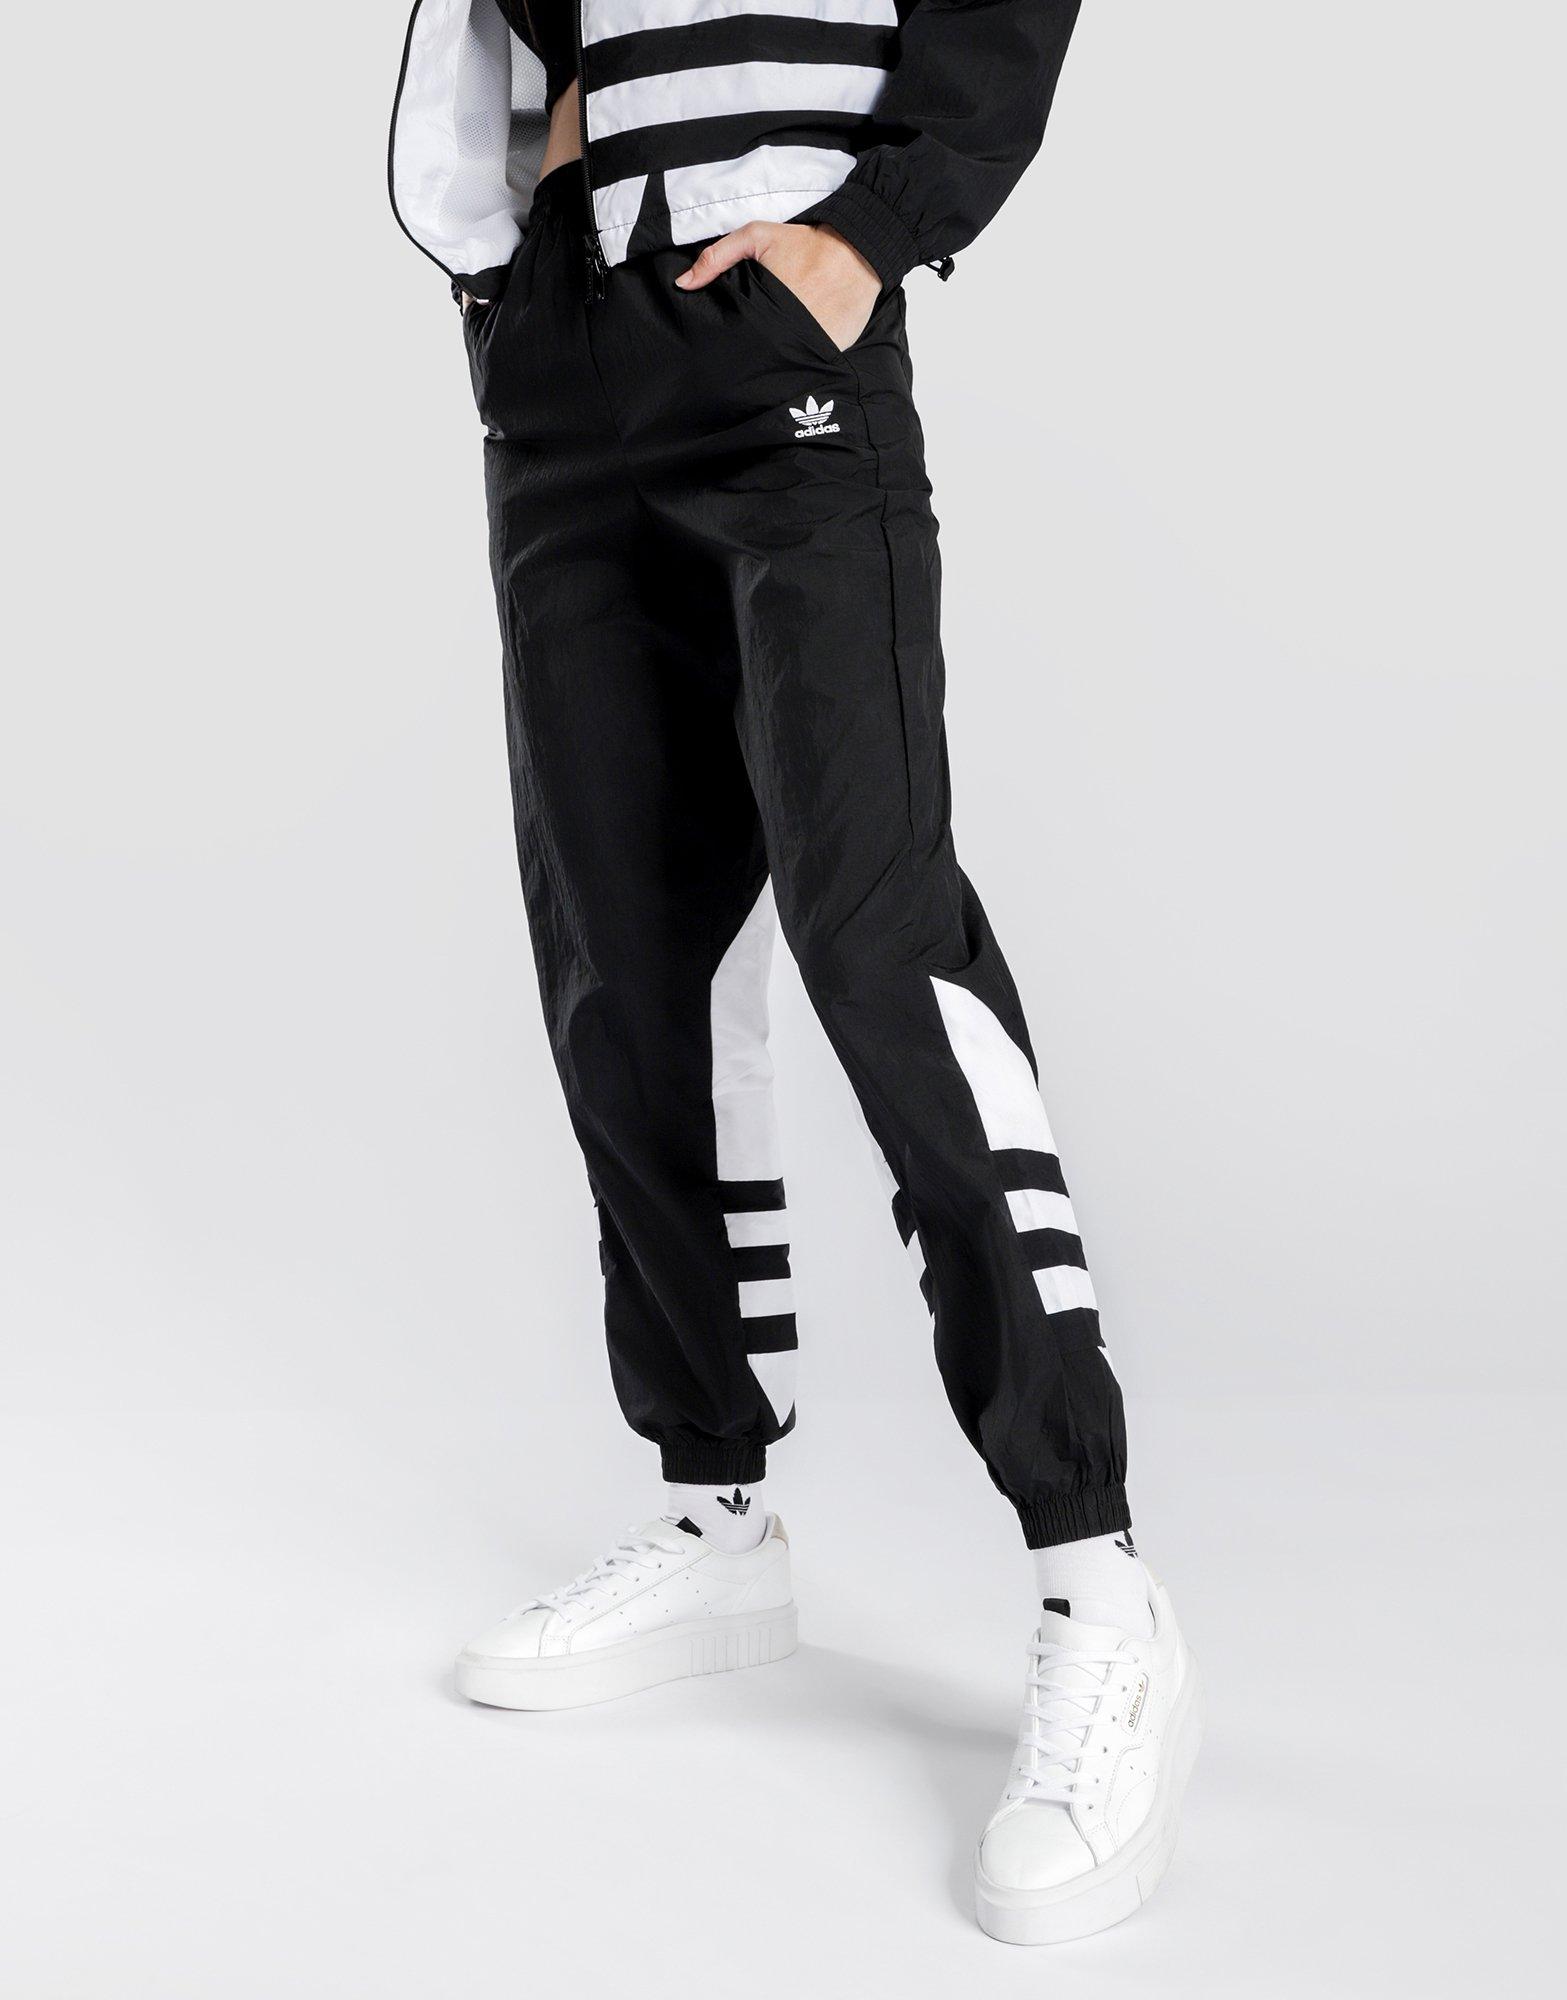 adidas tracksuit bottoms with zip legs